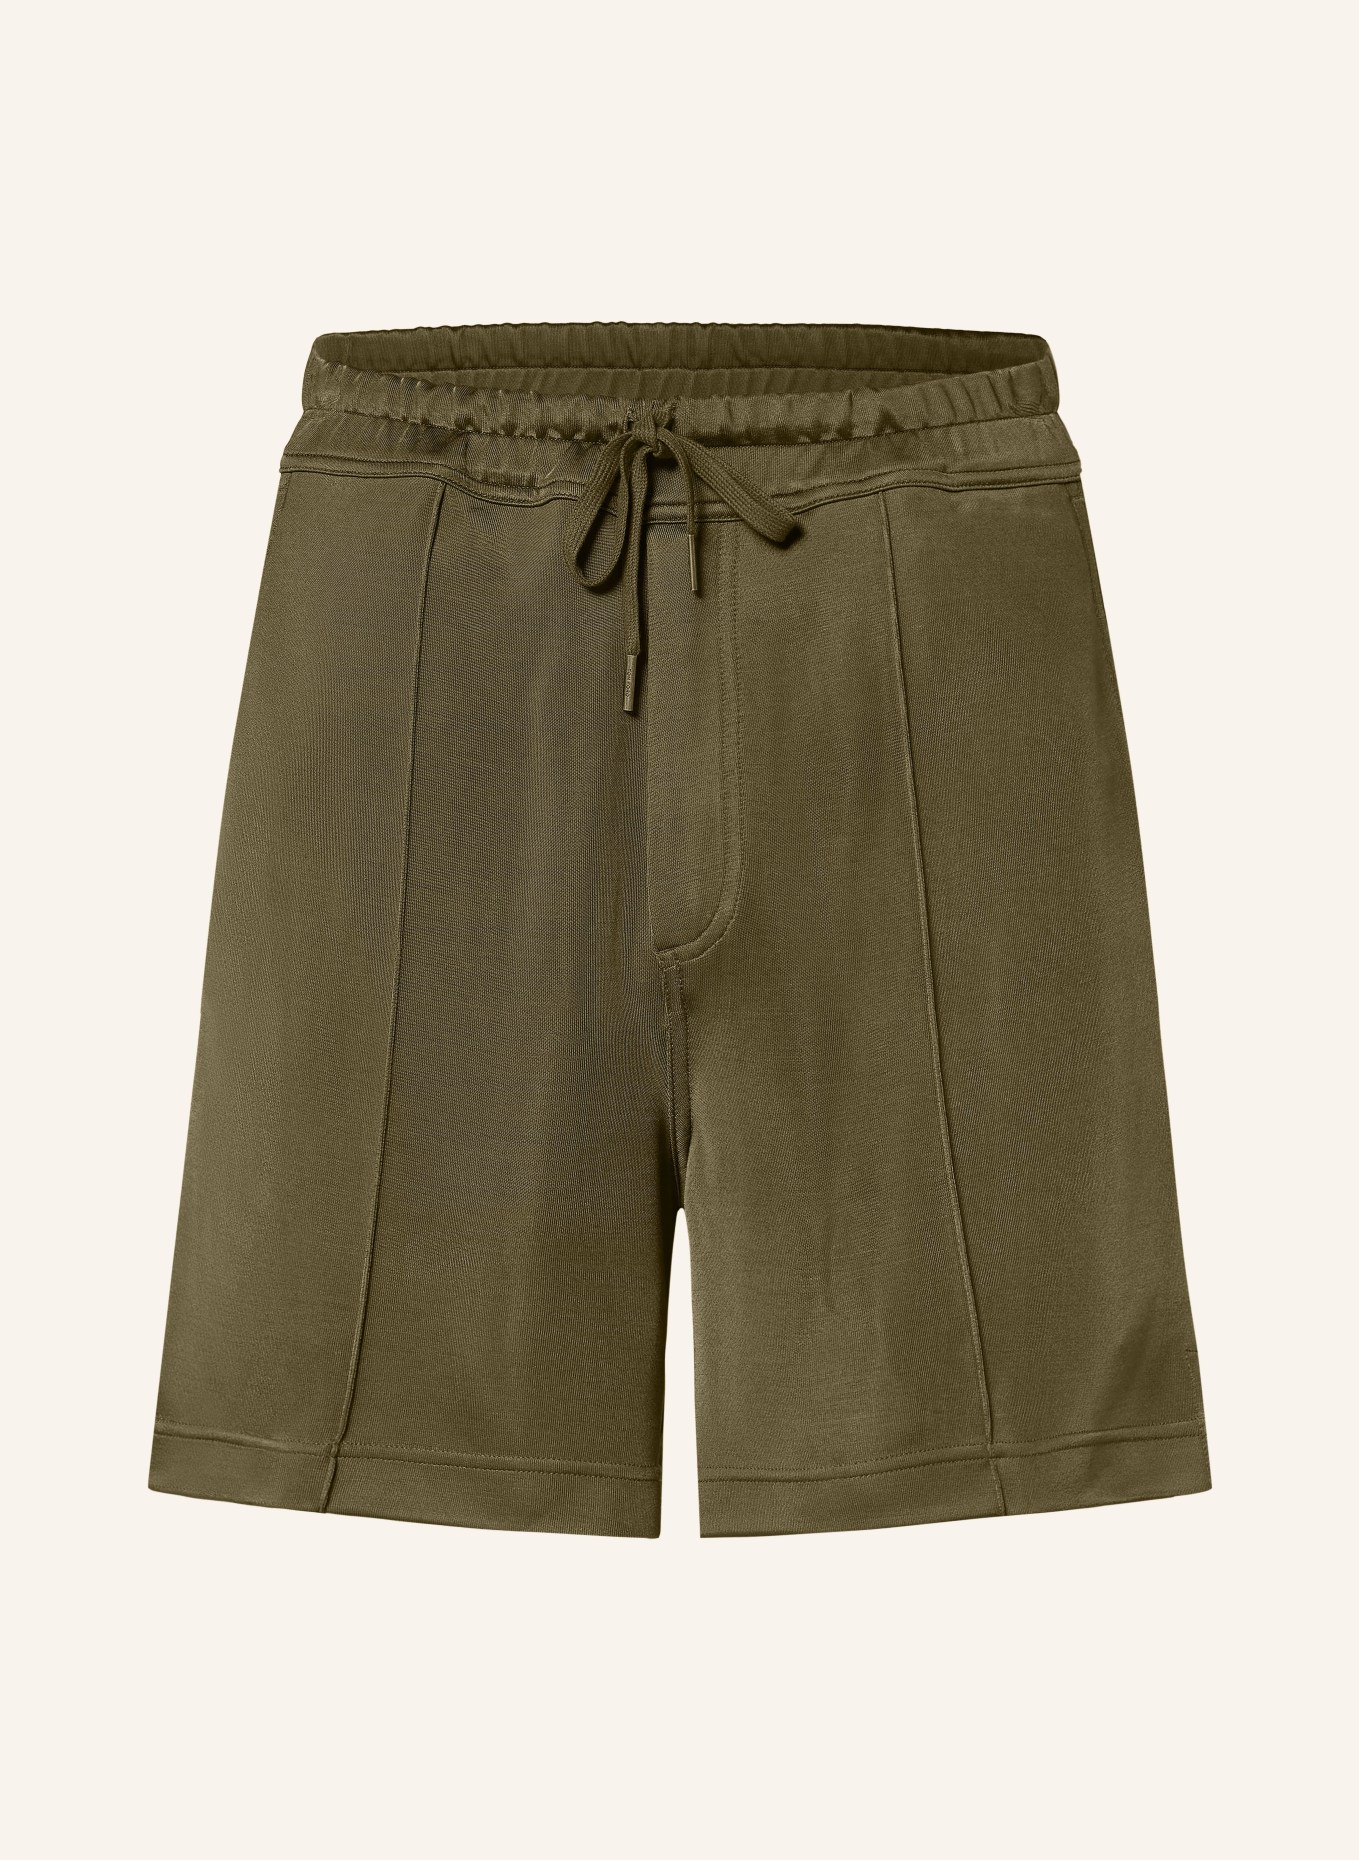 TOM FORD Shorts in jogger style, Color: KHAKI (Image 1)